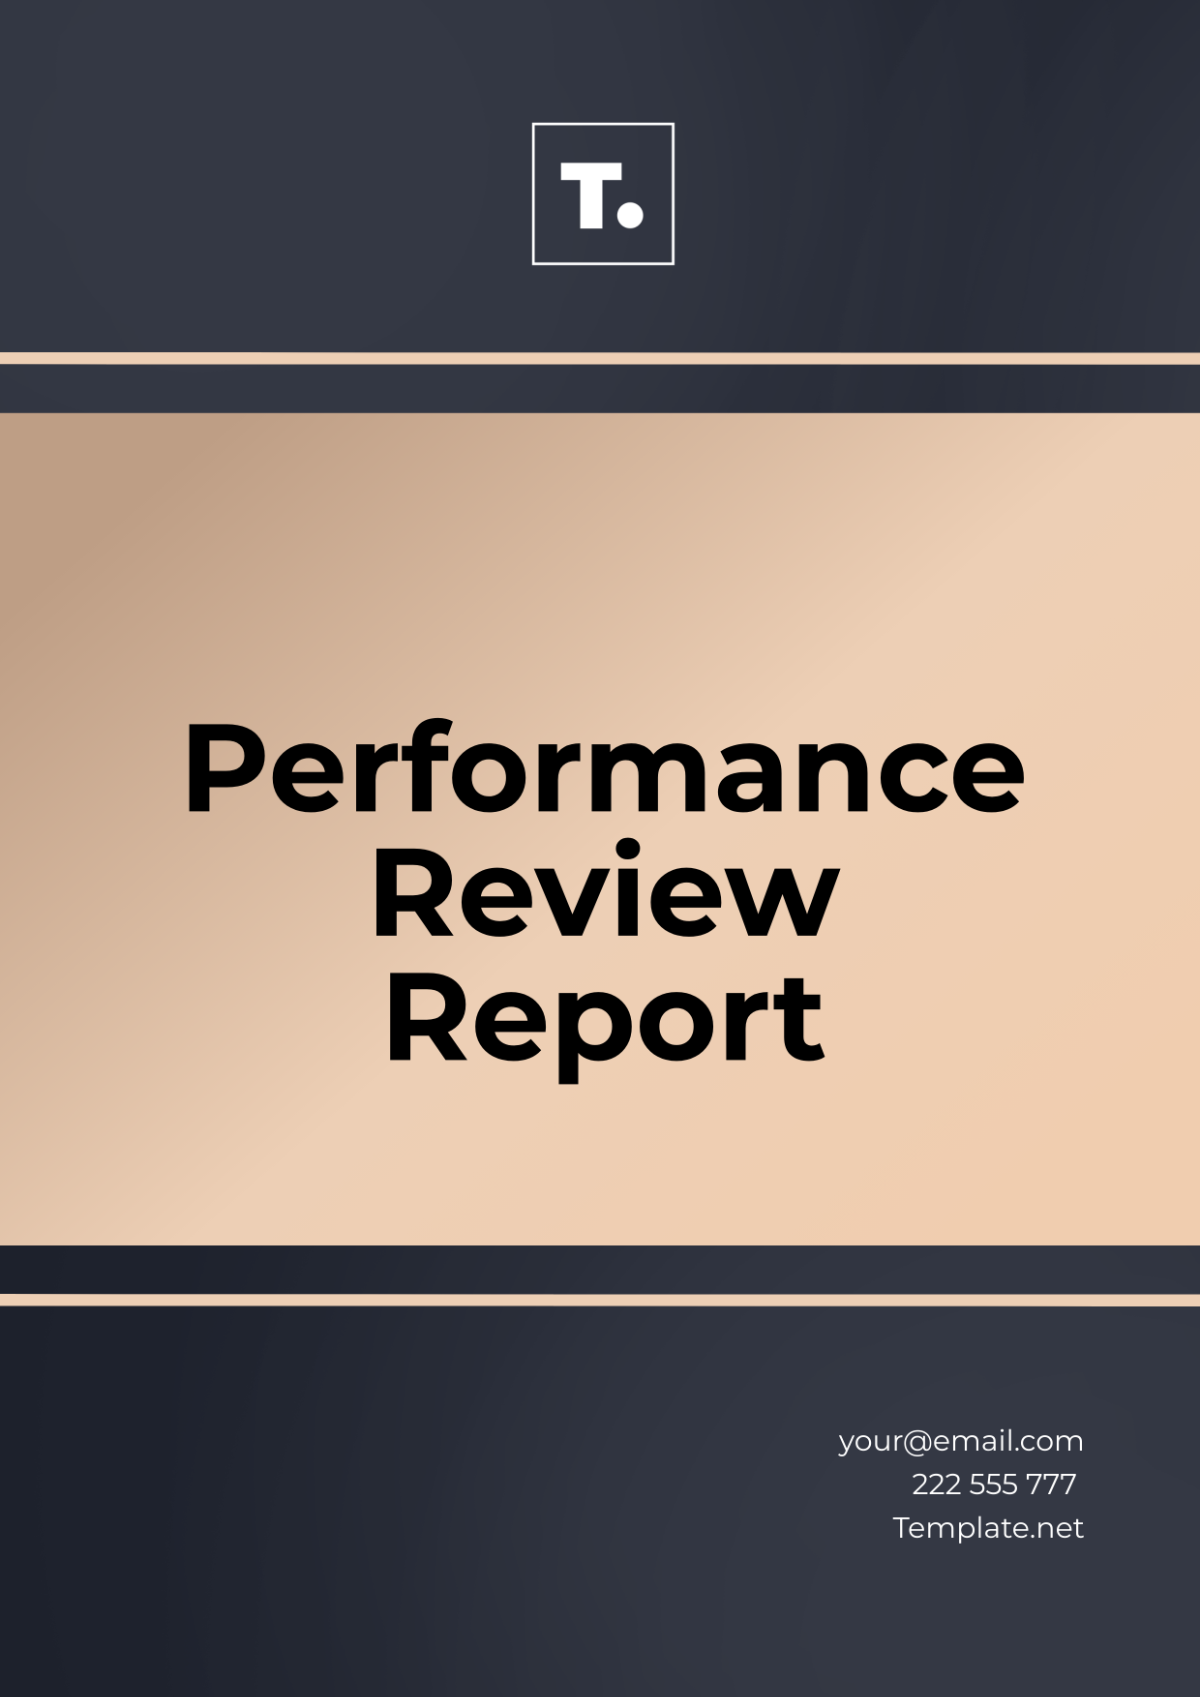 Performance Review Report Template